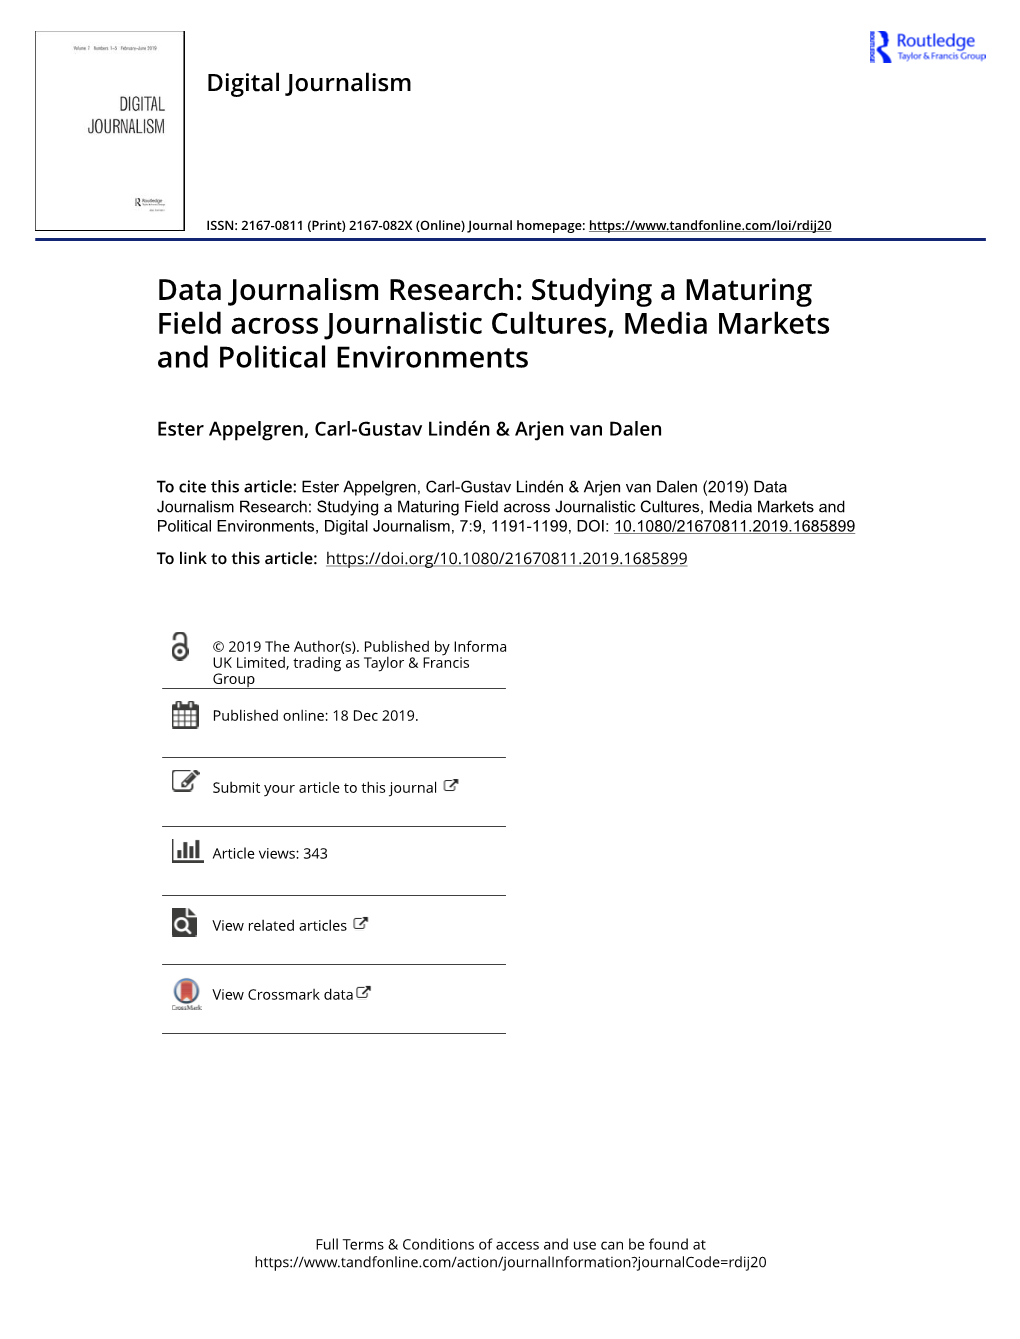 Data Journalism Research: Studying a Maturing Field Across Journalistic Cultures, Media Markets and Political Environments